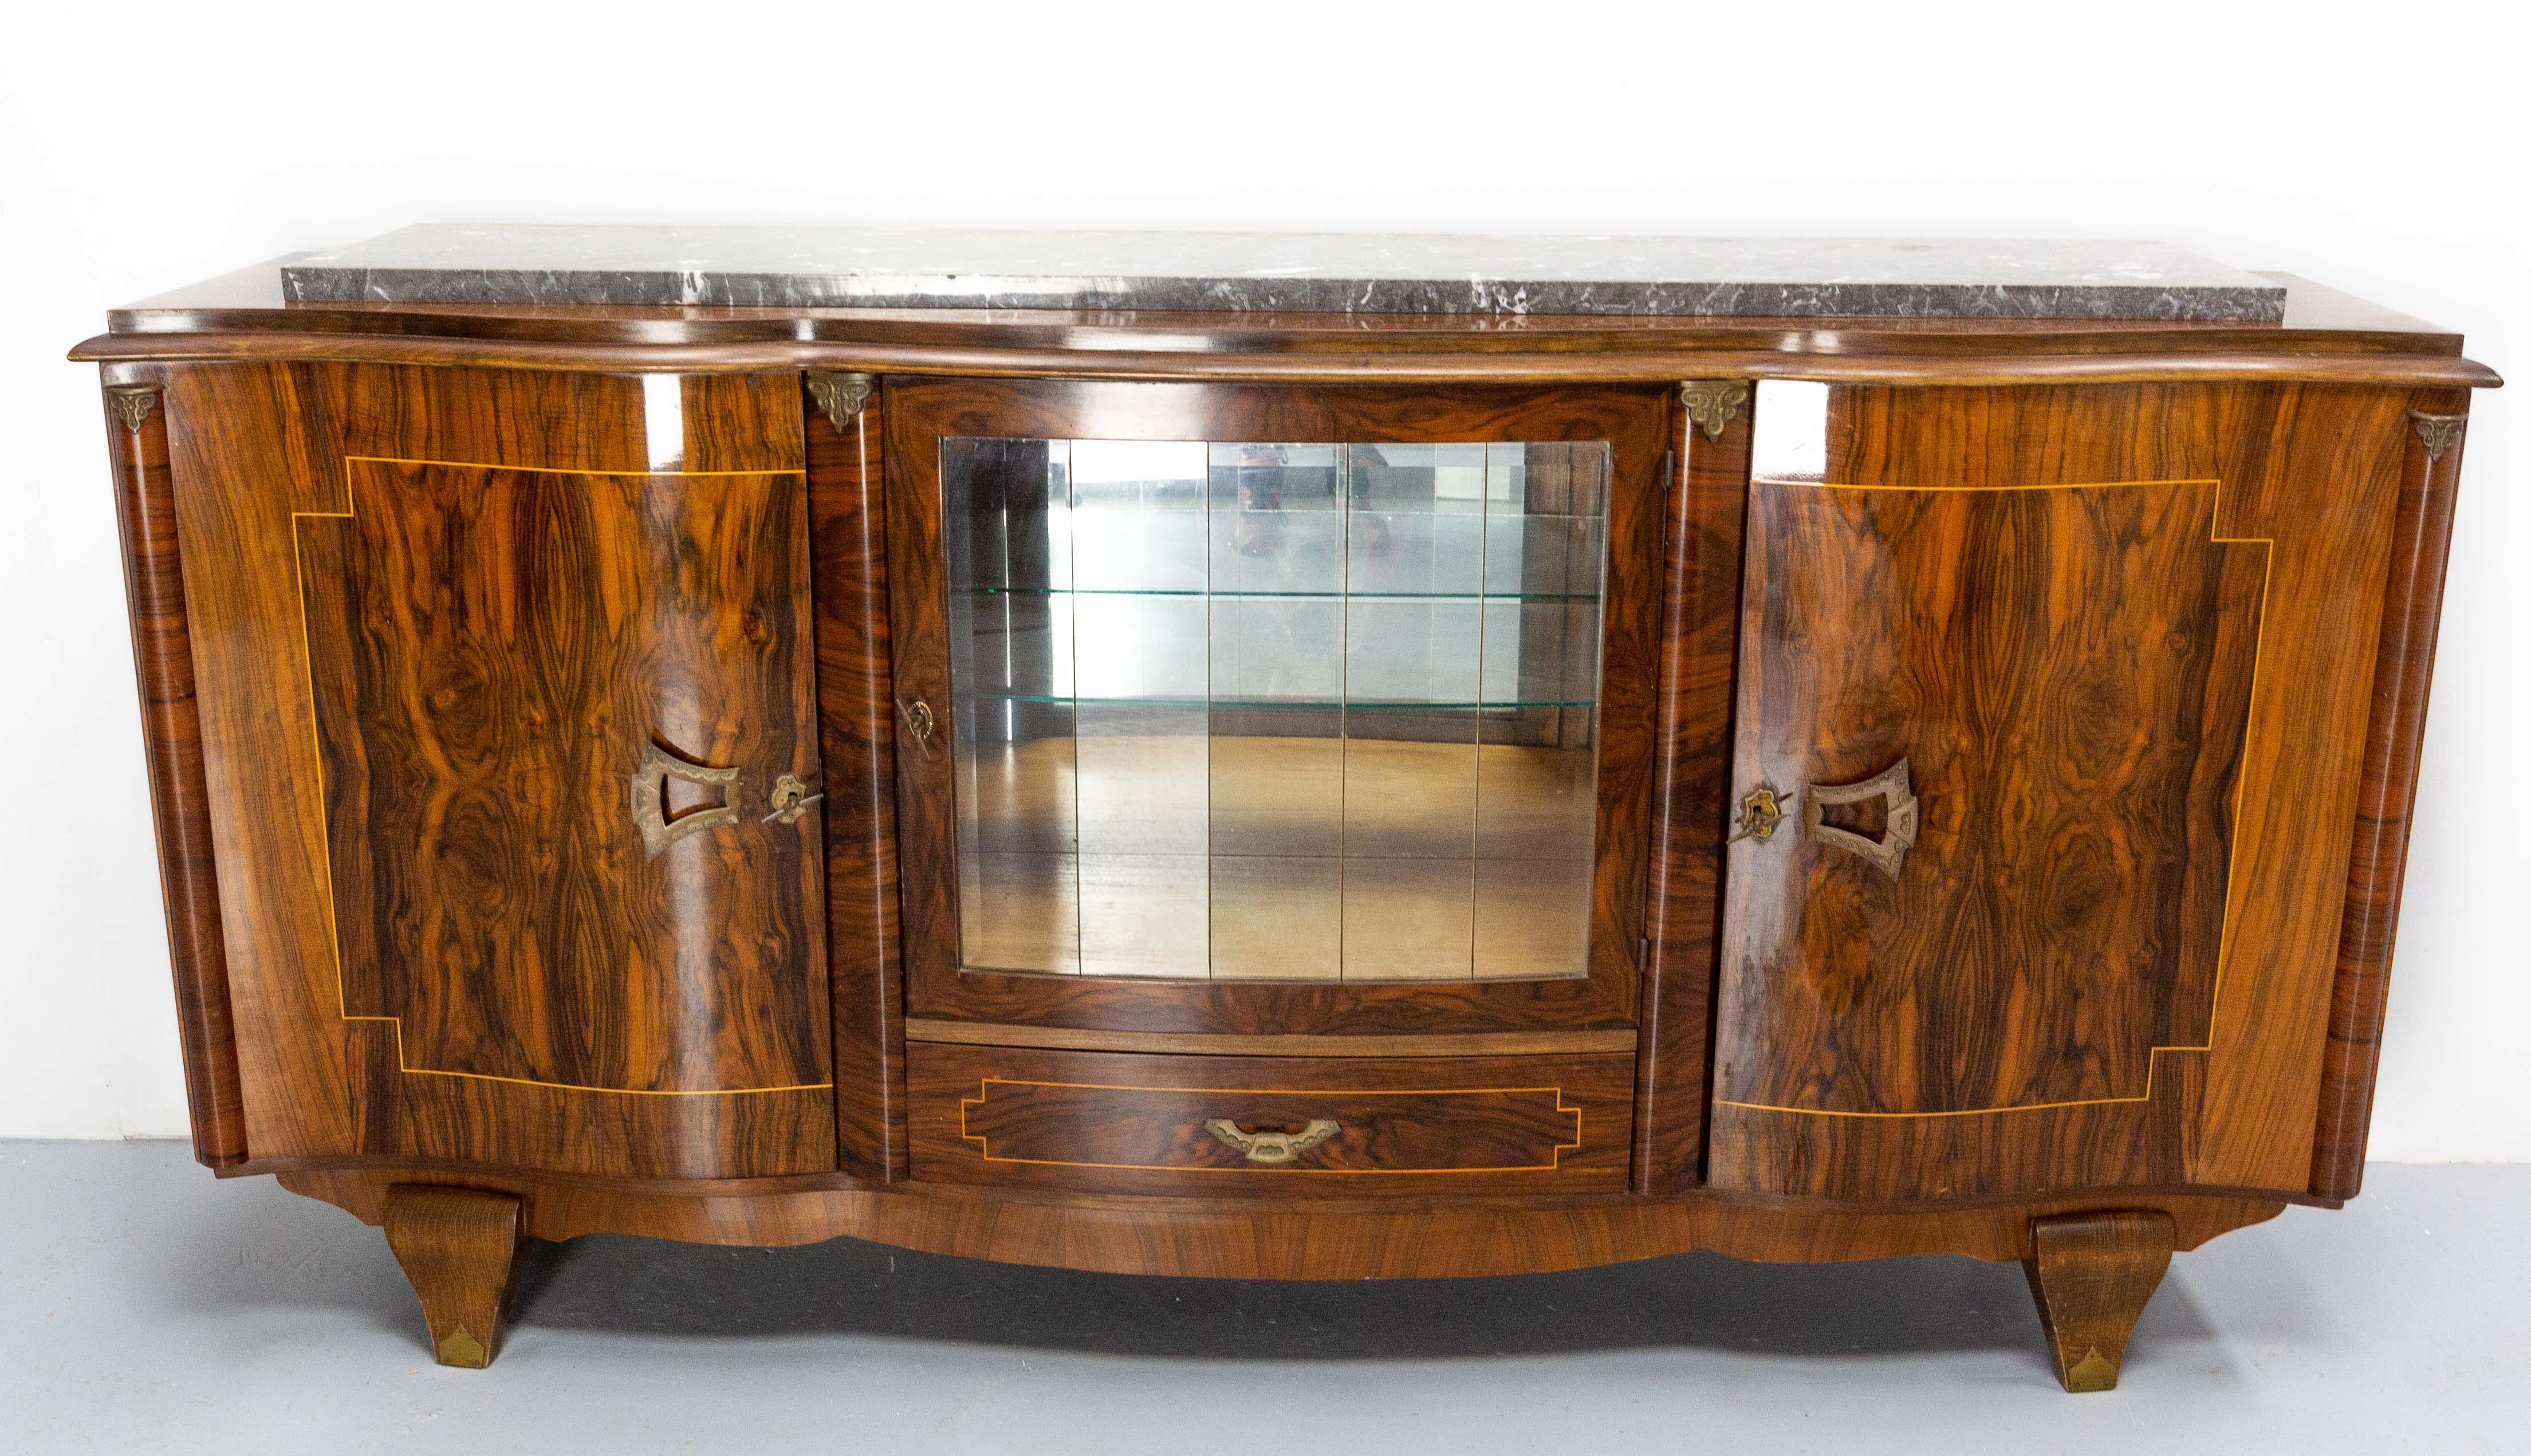 Mid-century characterful credenza sideboard French buffet circa 1950-1960
Walnut burl, solid marble and brass.
Each part of brass is worked with care.
The beveled glass door is made of five glass plates.
Marquetry nets on the shelves
